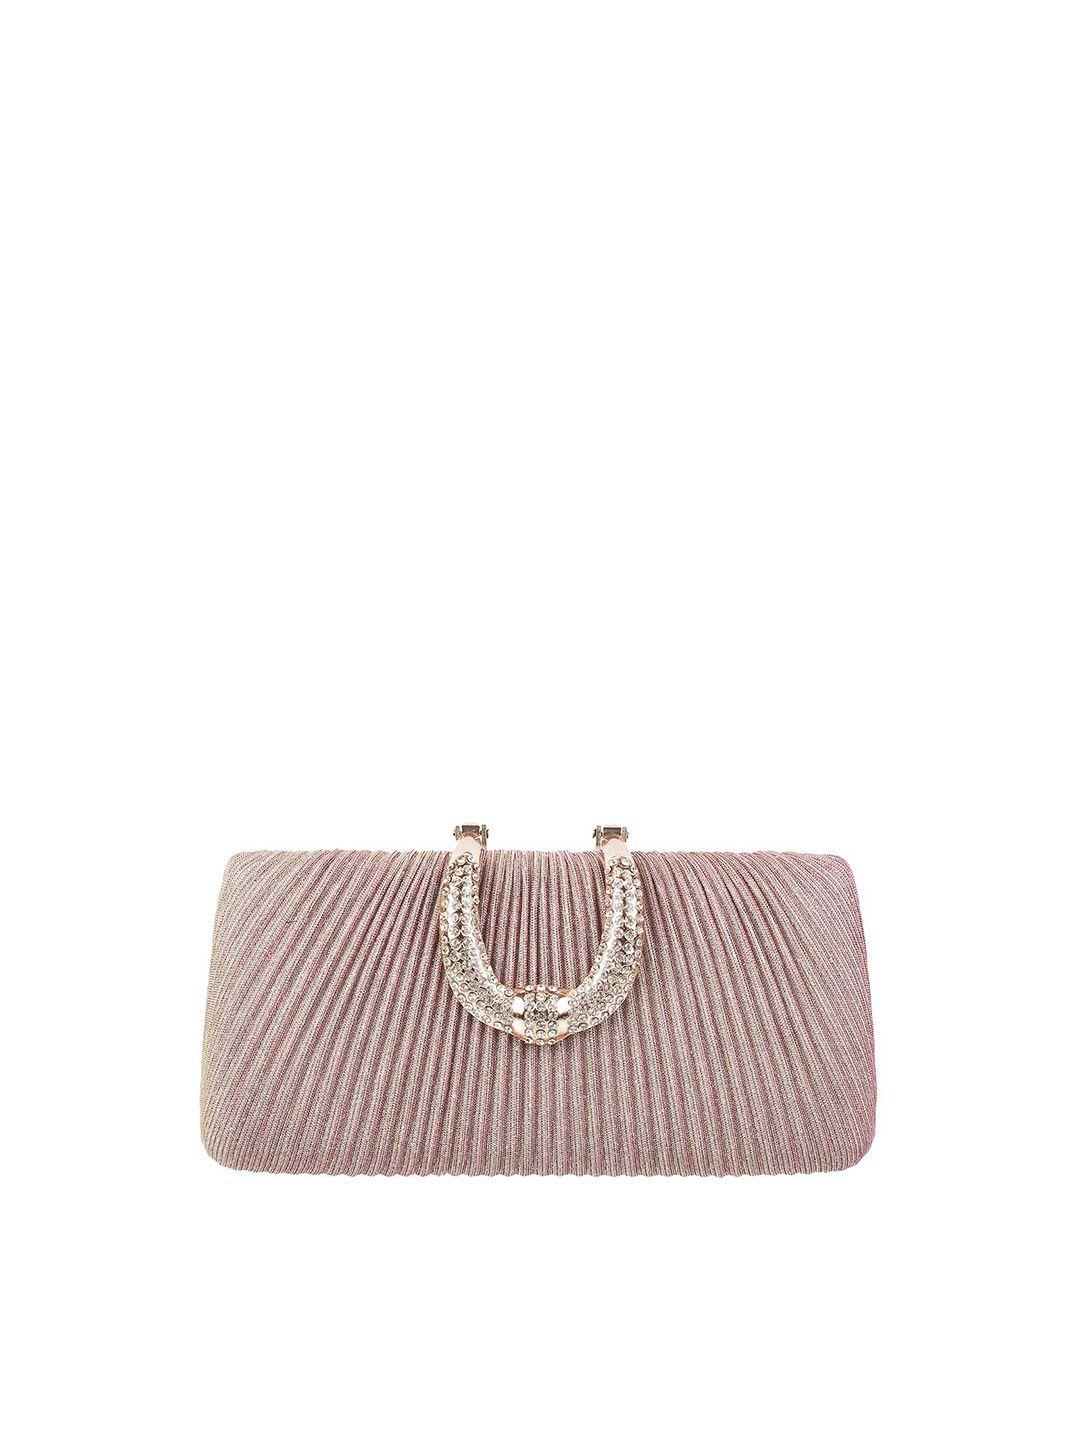 metro gold-toned & peach-coloured embellished box clutch